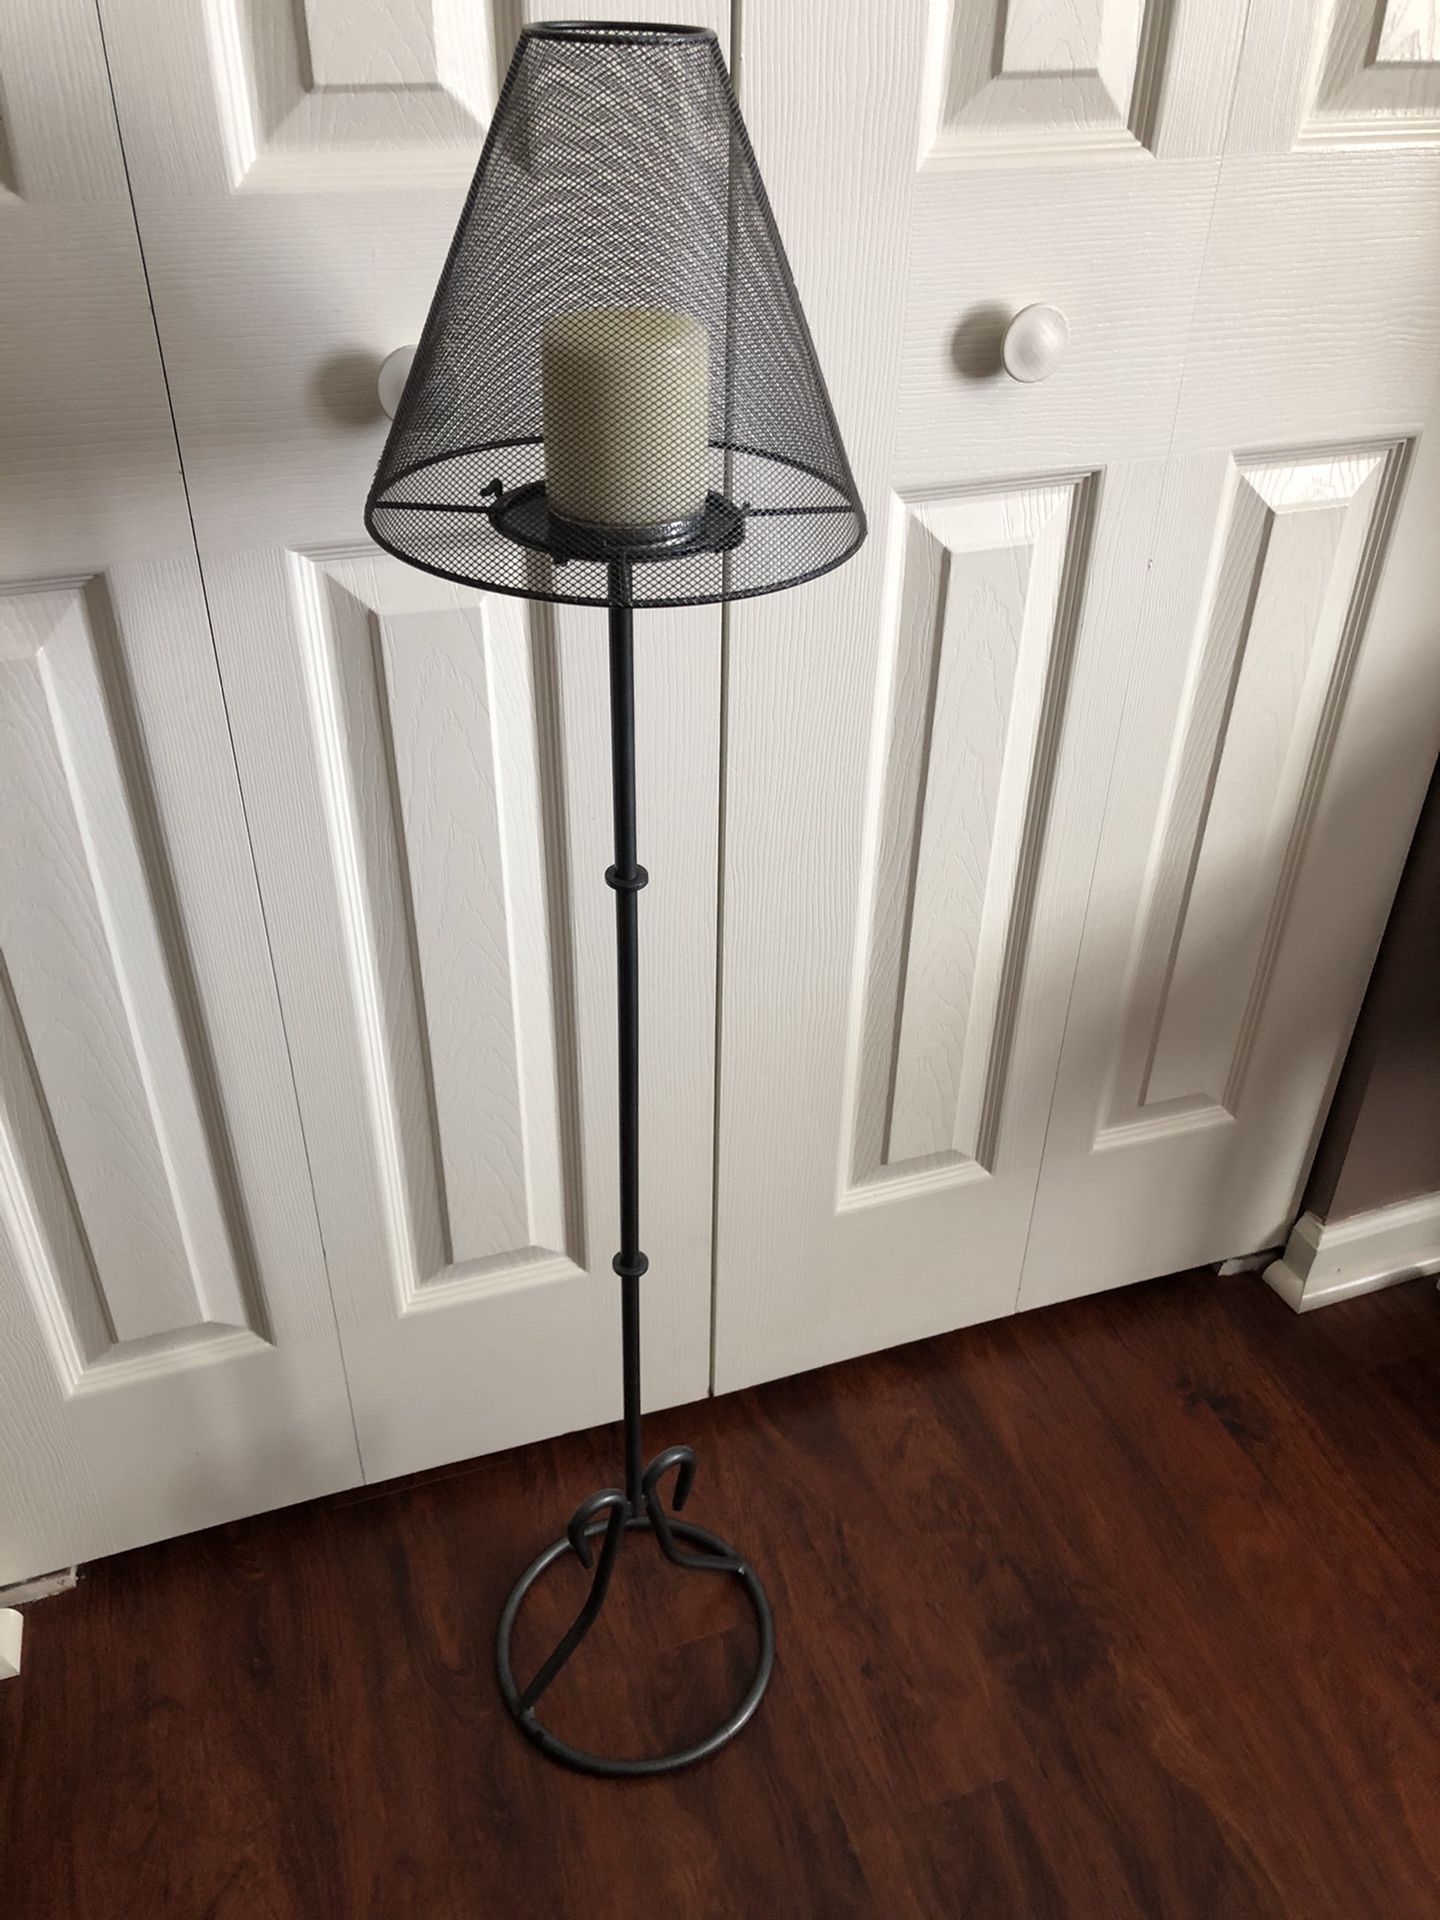 Tall candle holder